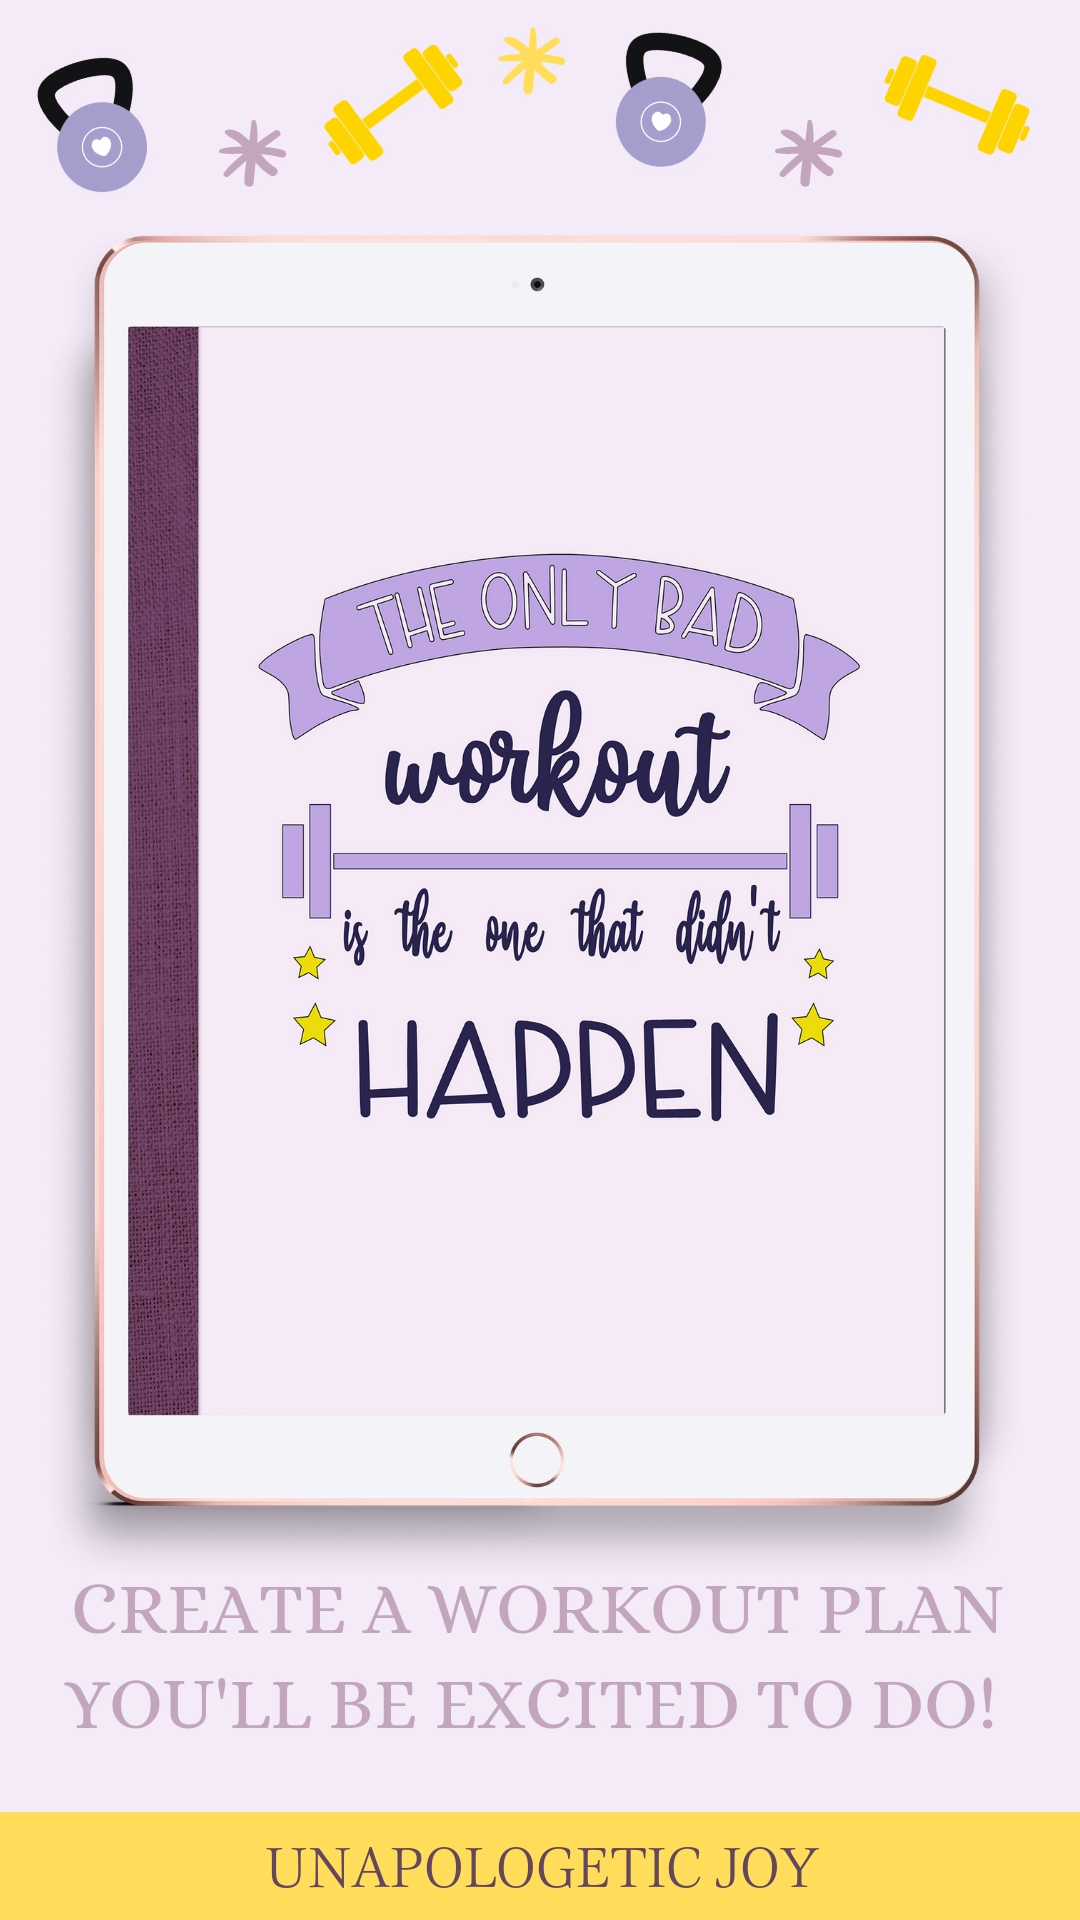 No Bad Workout Digital Fitness Planner - No Bad Workout Digital Fitness Planner -   15 fitness Planner for beginners ideas